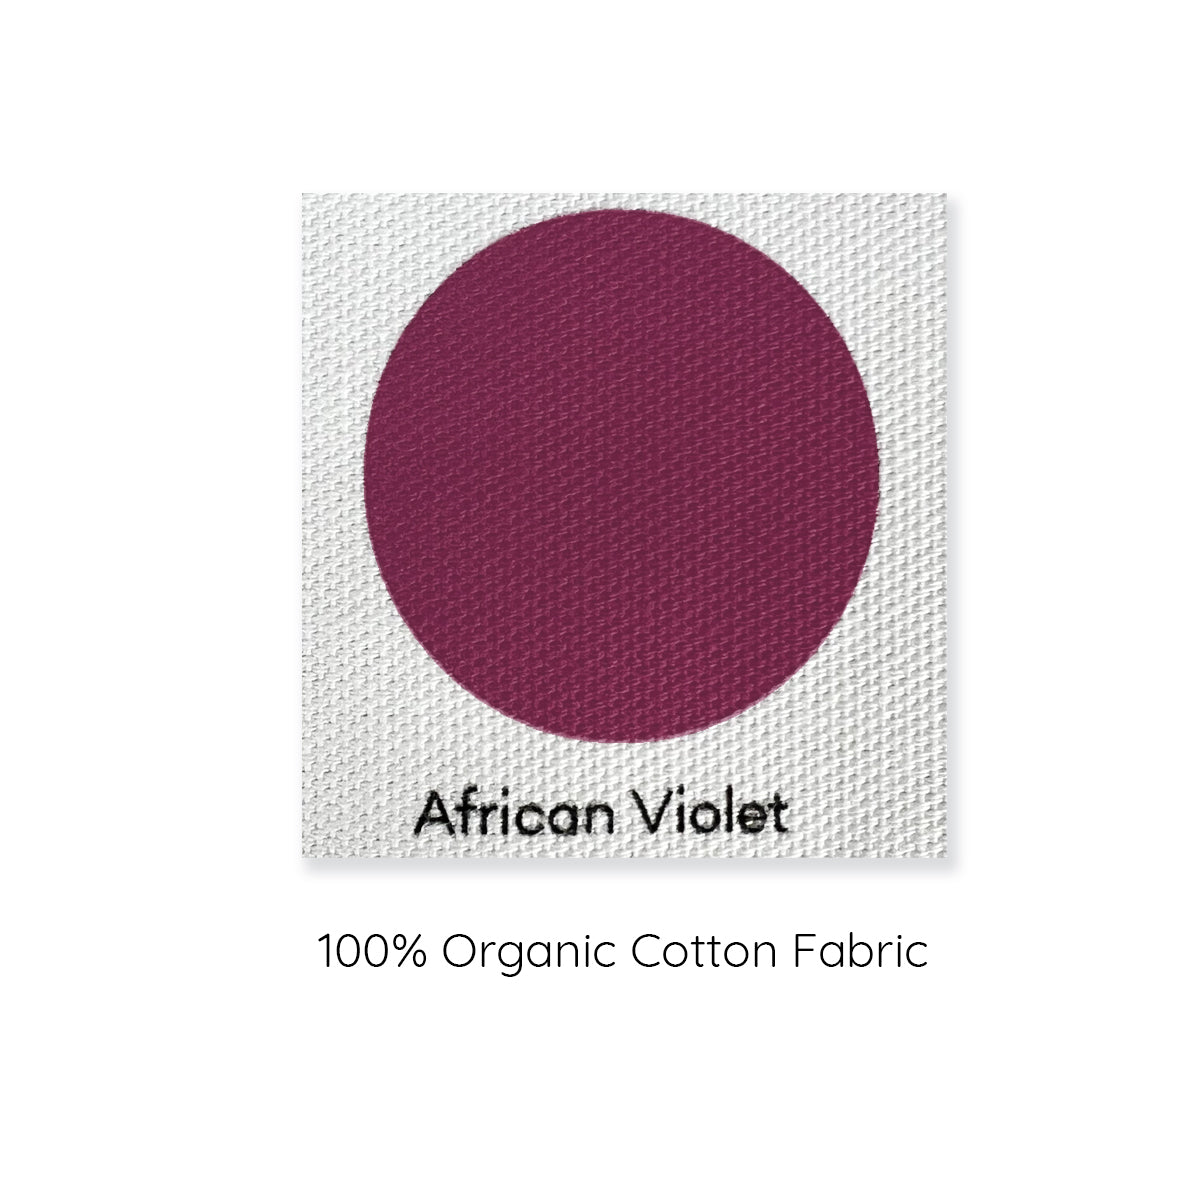 African violet cushion colour swatch sample.